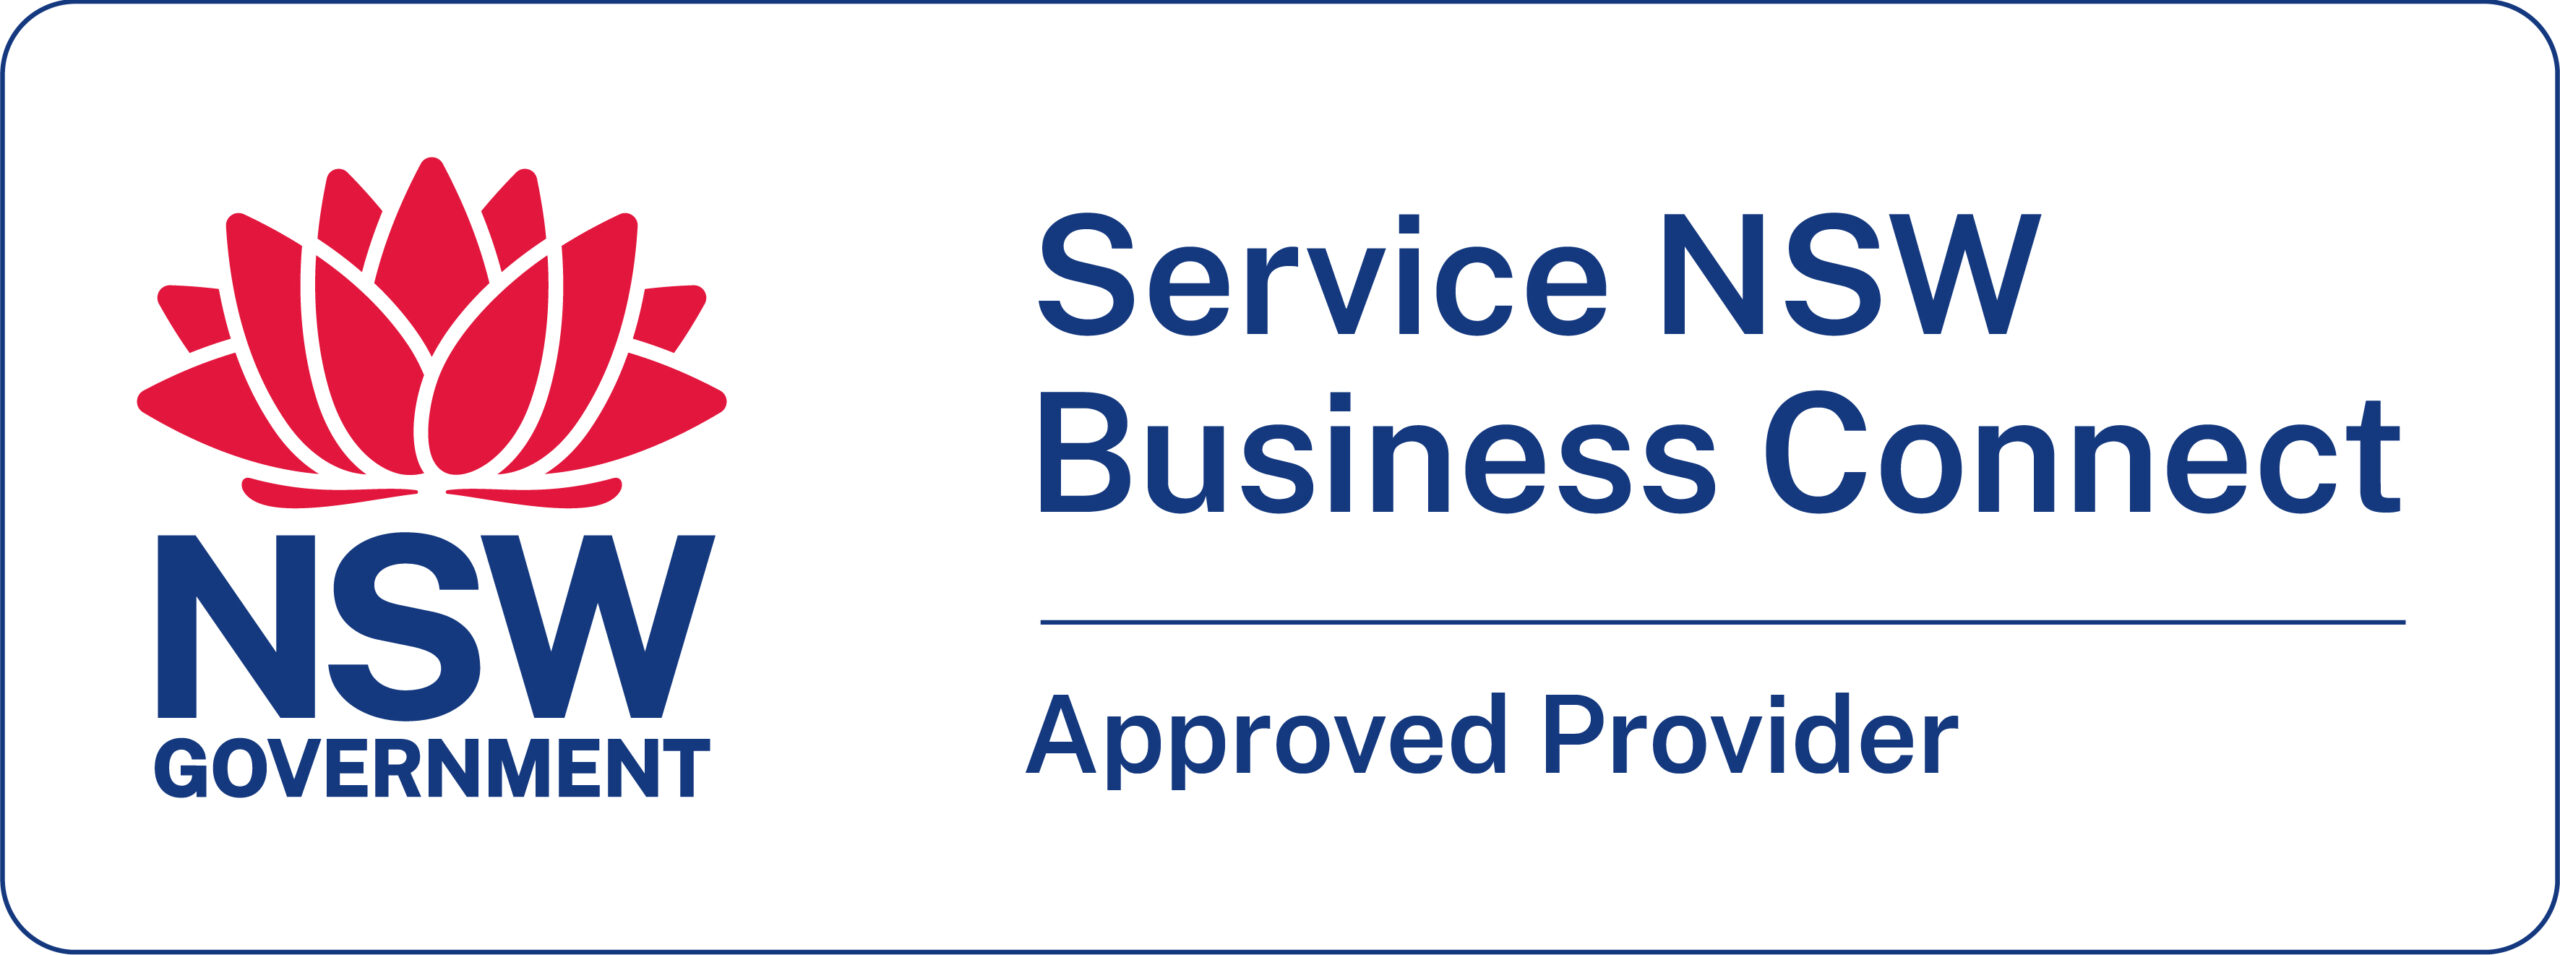 snsw 27015 business connect approved provider fa